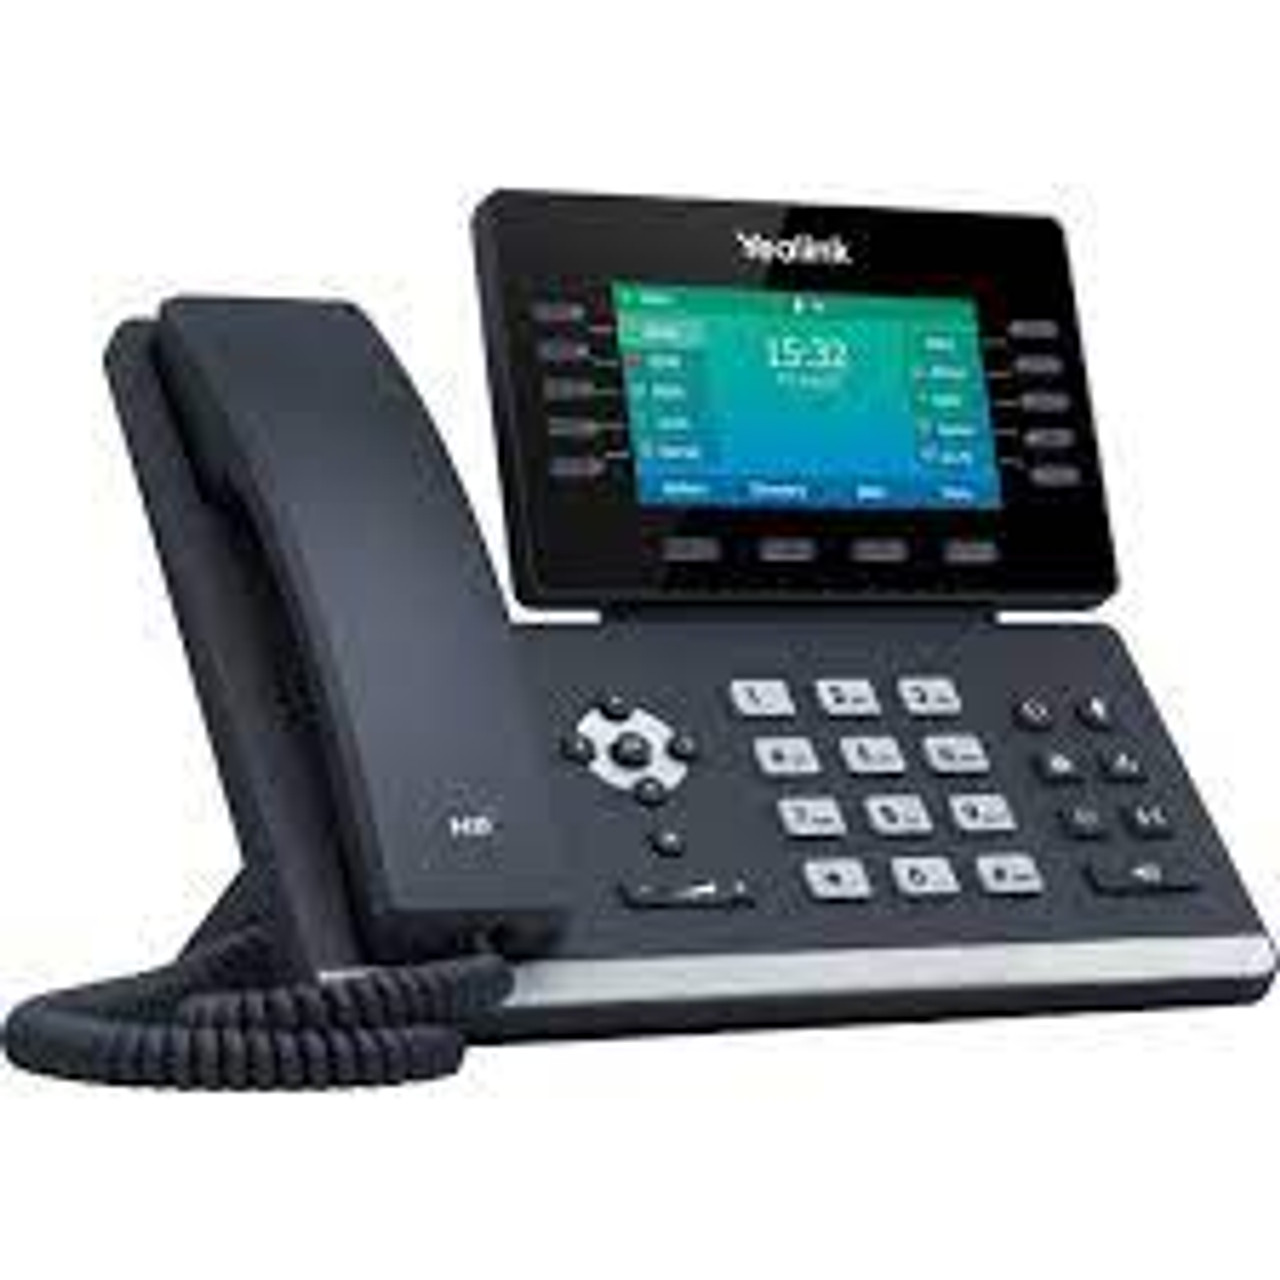 Yealink SIP-T54W IP Phone Corded/Cordless Corded/Cordless Wi-Fi,  Bluetooth Wall Mountable, Desktop Classic Gray SIP-T54W